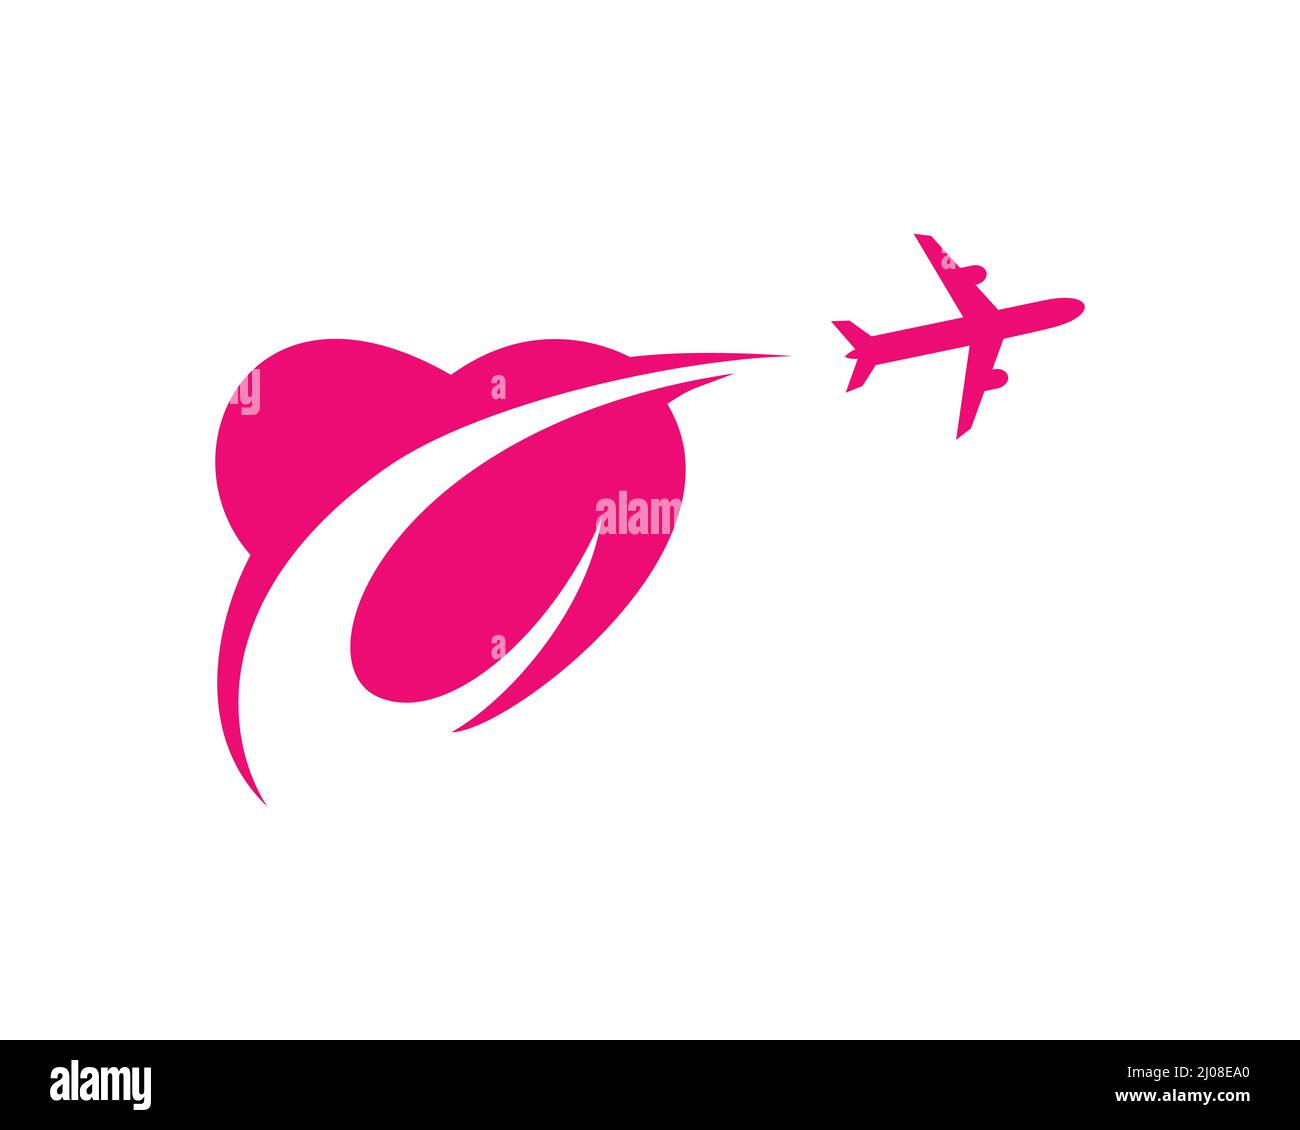 Love Silhouette combined with Swoosh and Take off Plane, Honeymoon Travel and Vacation Symbol Stock Vector